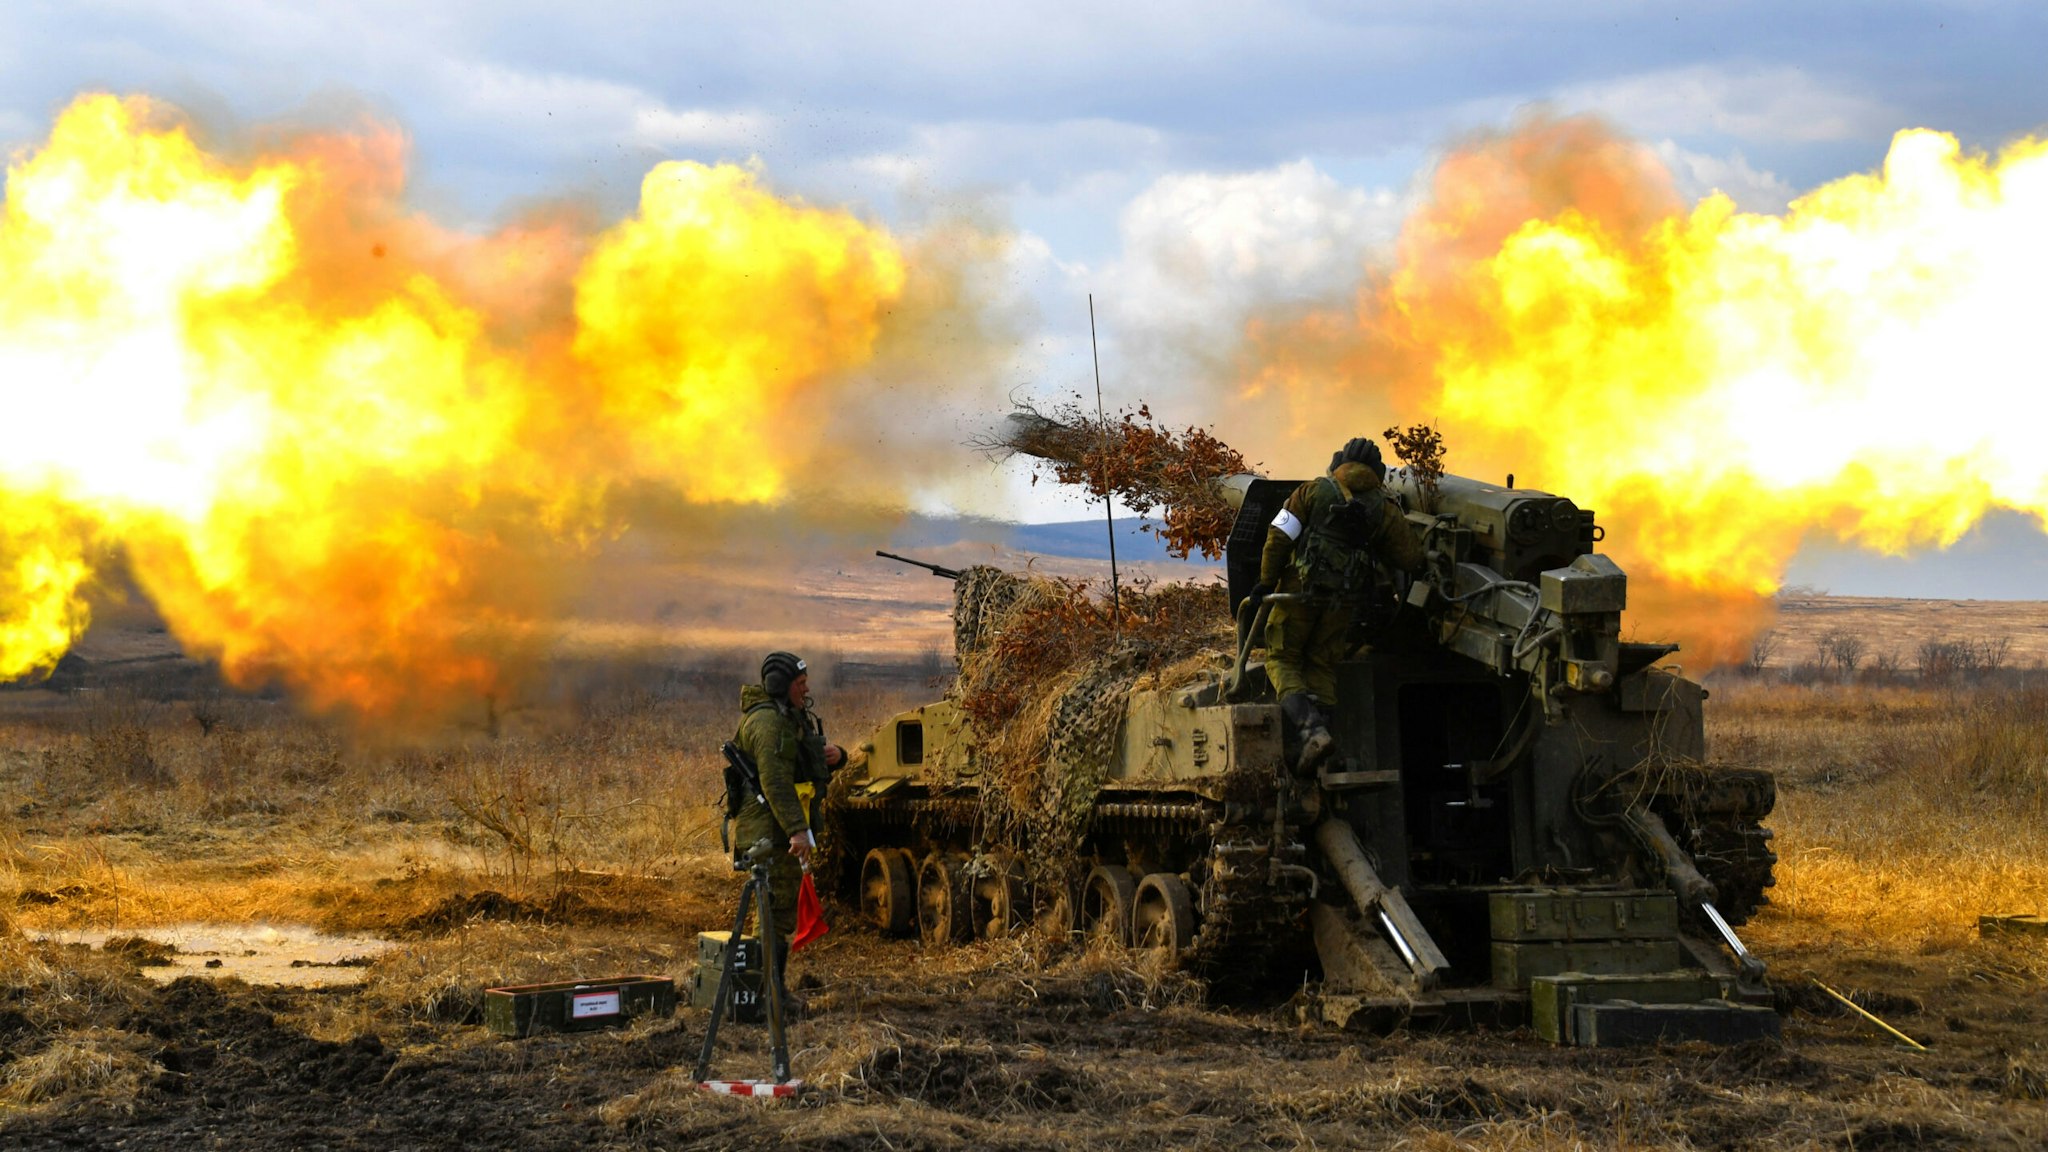 PRIMORYE TERRITORY, RUSSIA - MARCH 21, 2017: A 2S5 Giatsint self-propelled gun fires during tactical exercises held by artillery detachments of the Russian Eastern Military District's 5th Army at the Sergeyevsky training ground. Over 2500 servicemen practice combat skills received in 2017 winter training exercises.